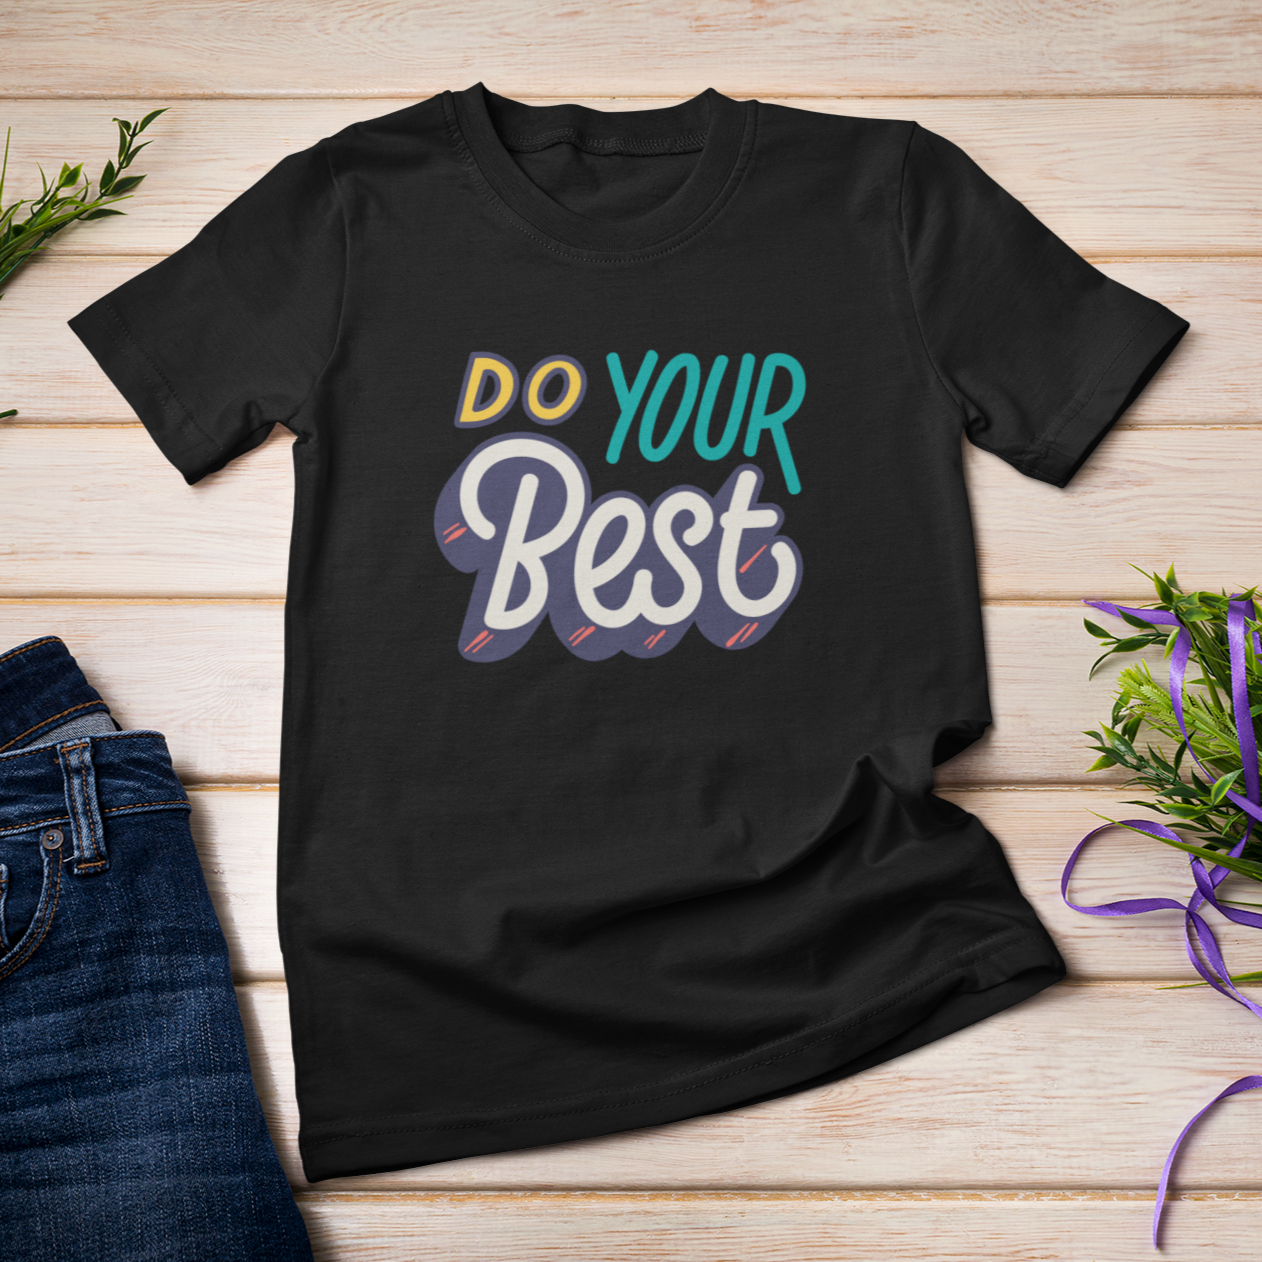 Story of Awakening Lifestyle Community Spirituality Relationships Love Light Meditation Oneness Earth Balance Healing Shop Store Charity Tree Nature Read Write T shirt Tops Tees Clothing Women Horoscope Organic Cotton Do Your Best Quote